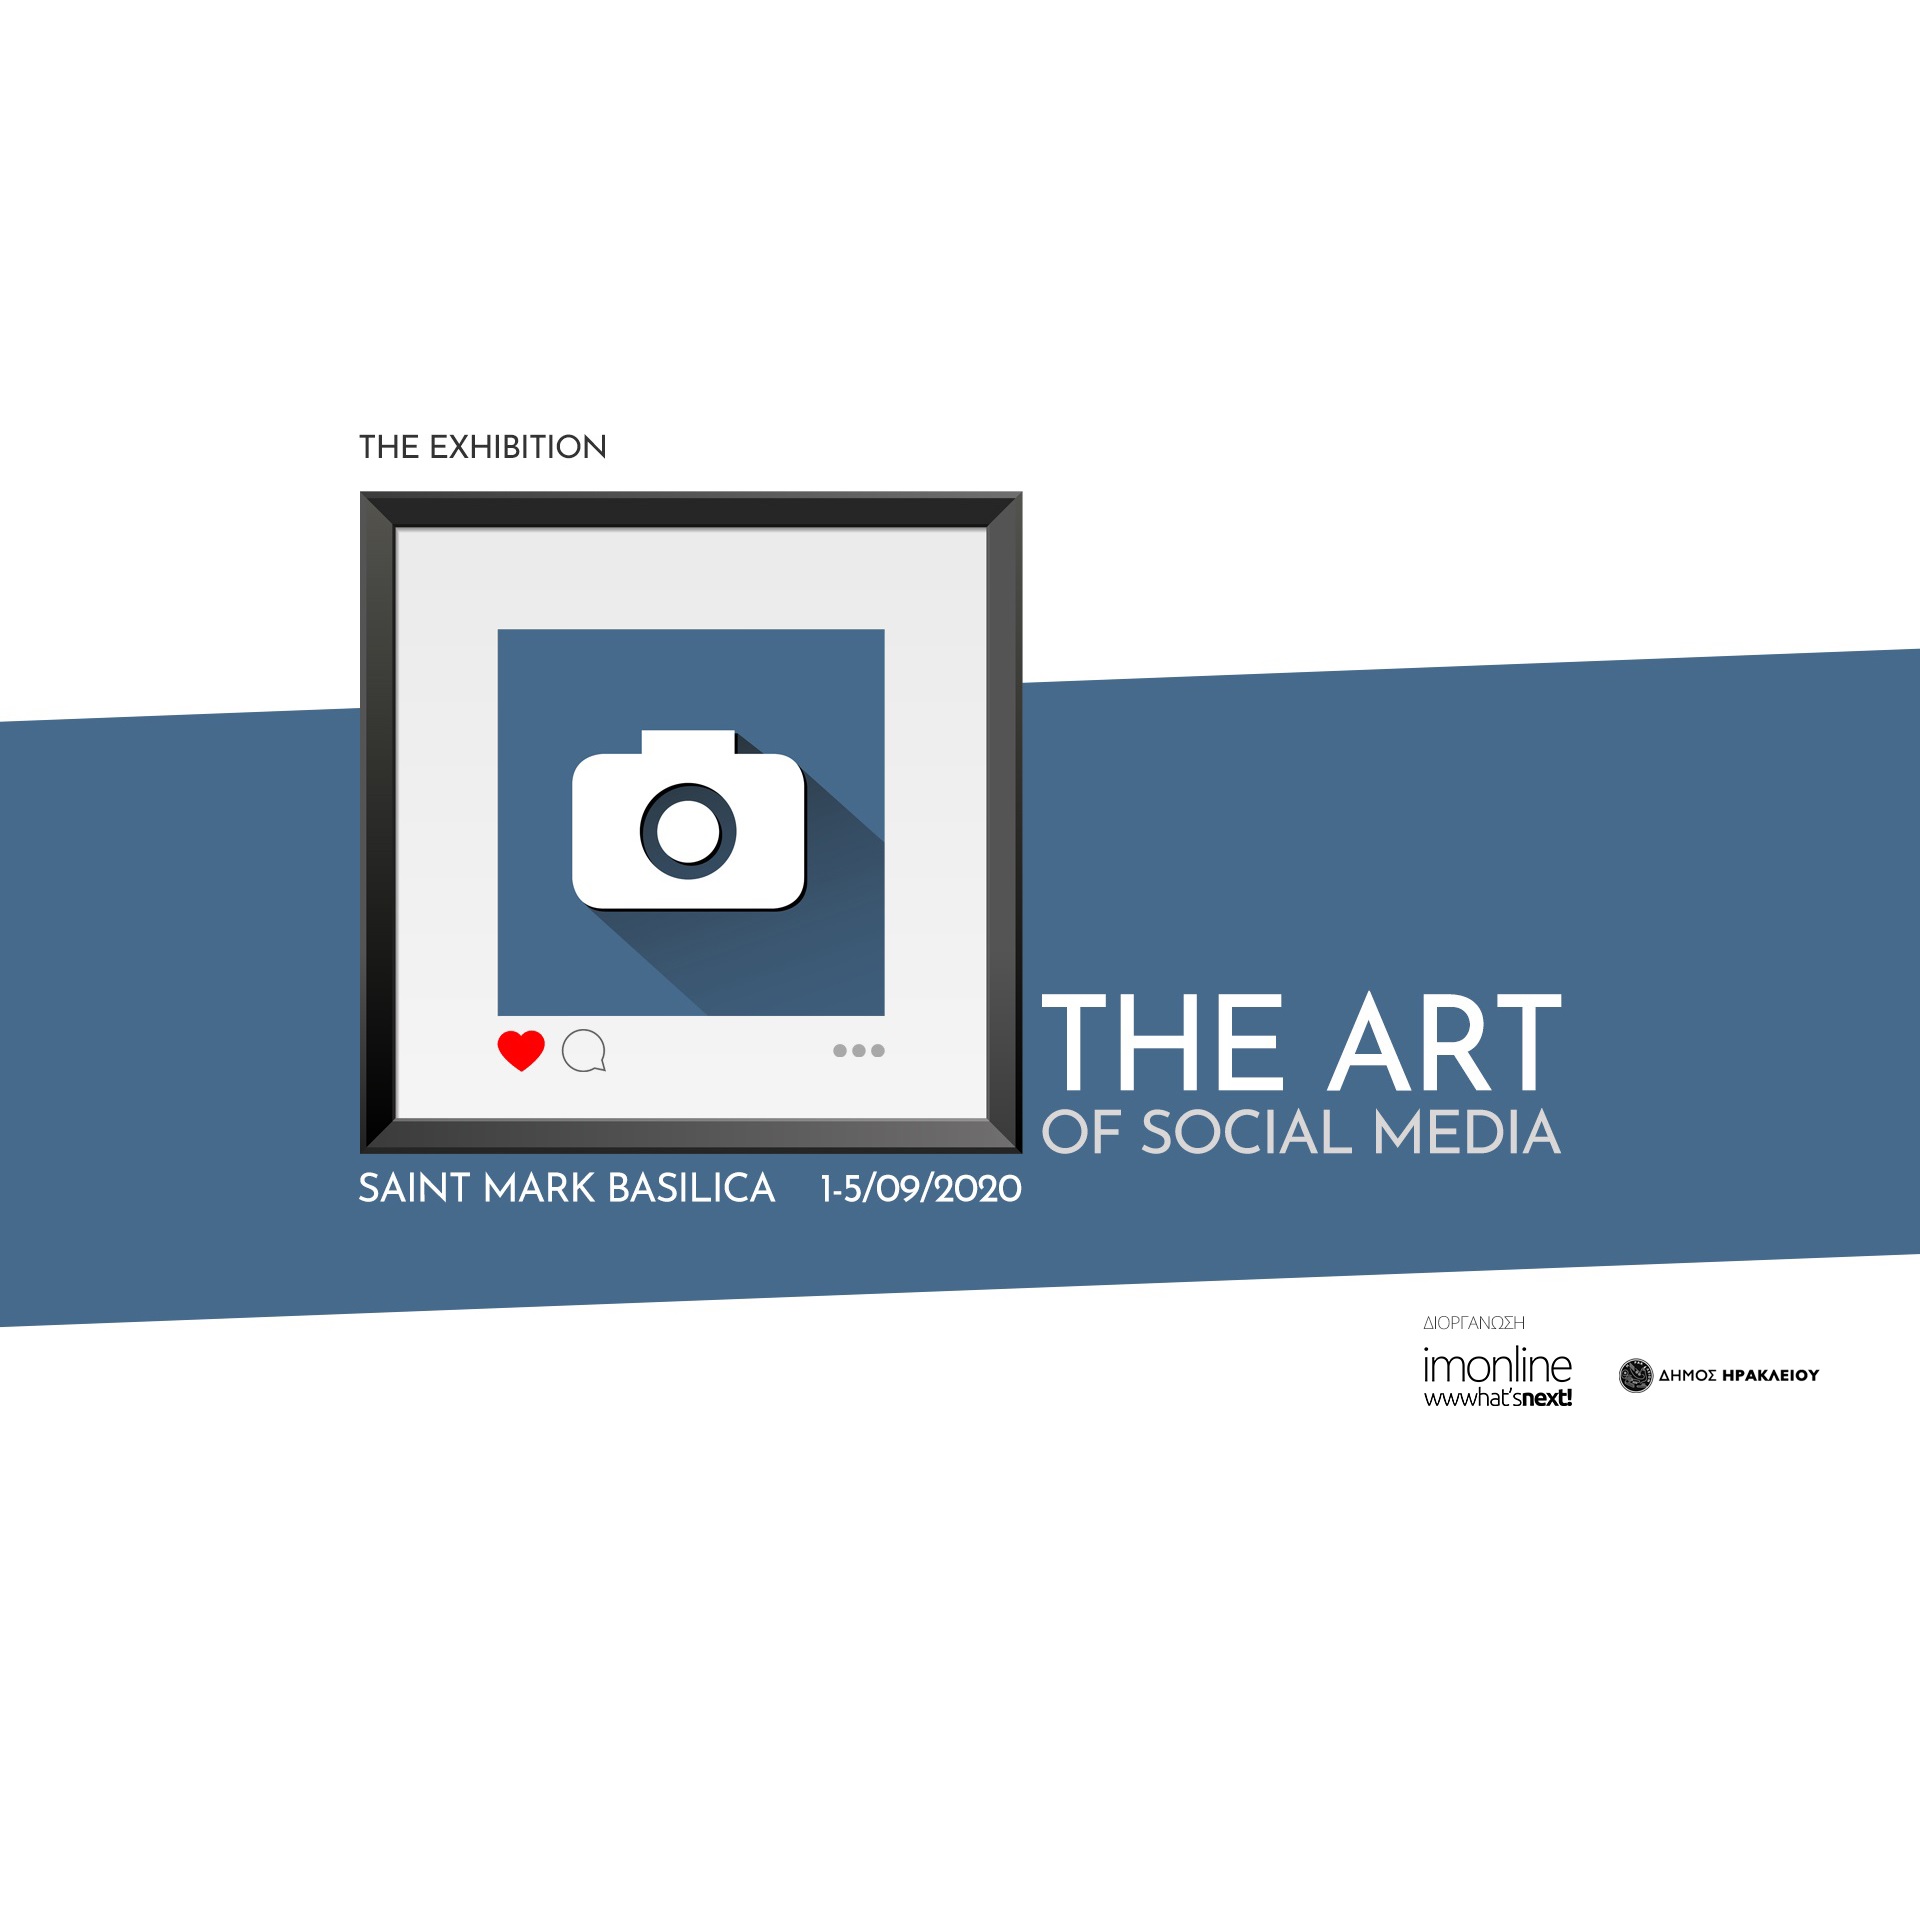 The Art of Social Media 2020 Photo Contest / Exhibition